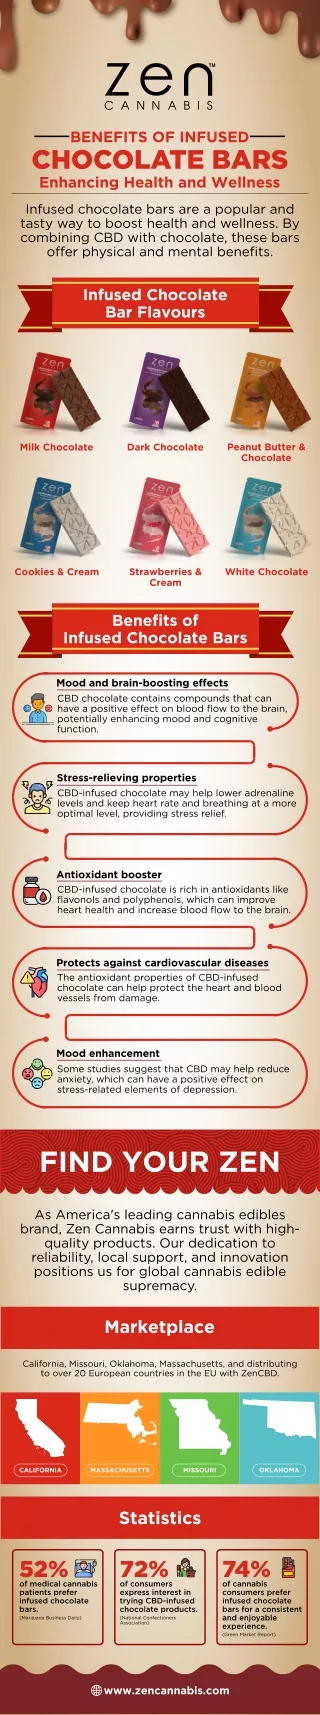 Benefits of Infused Chocolate Bars Enhancing Health and Wellness